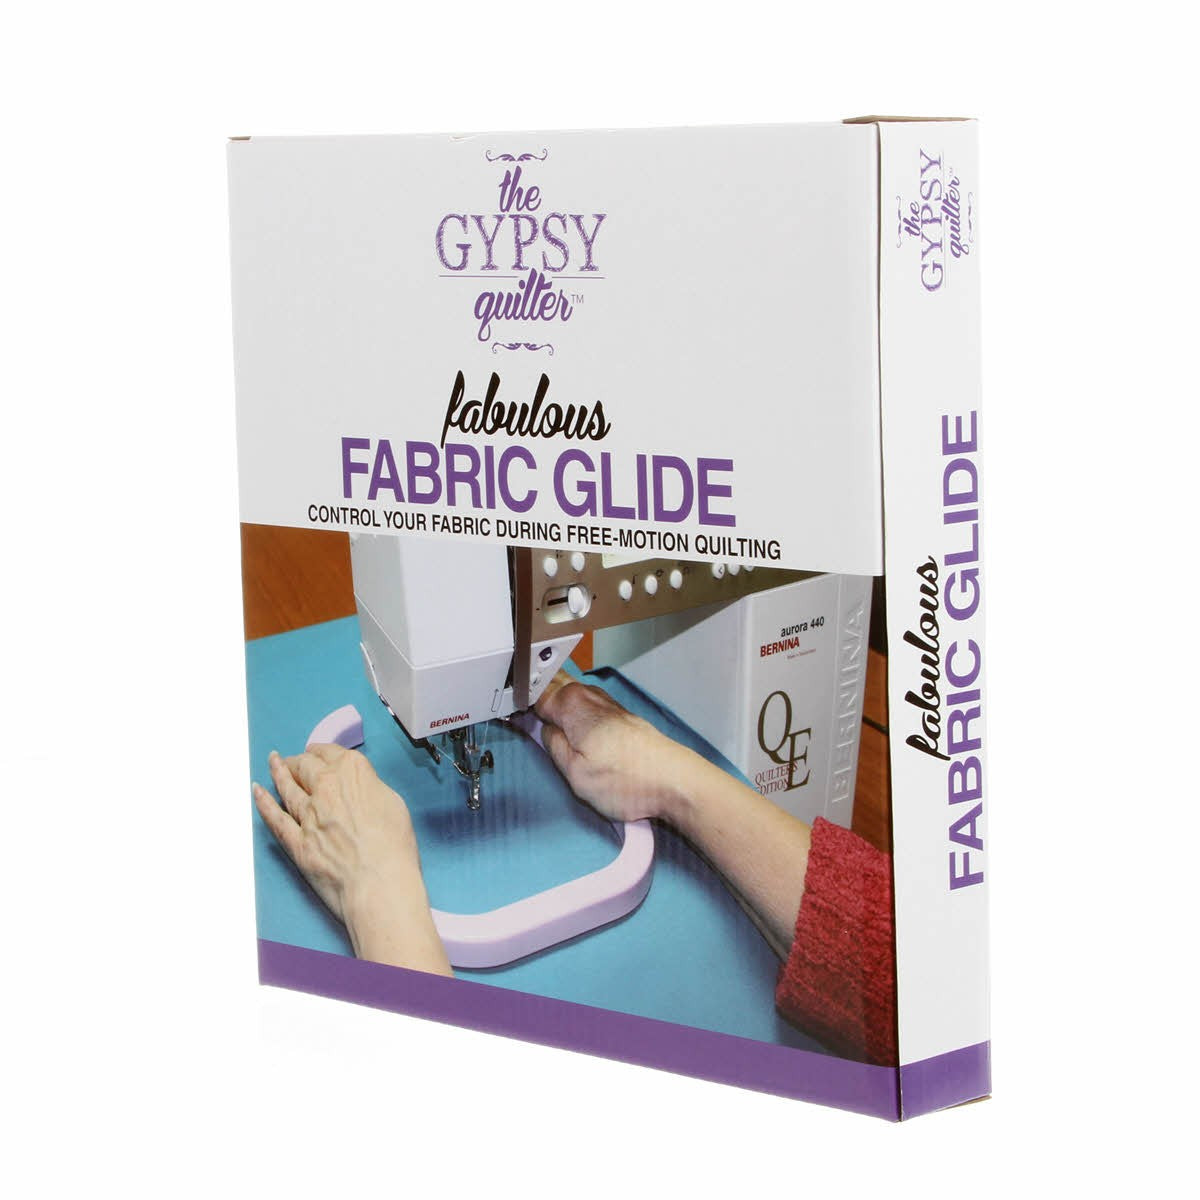 The Gypsy Quilter Fabulous Fabric Glide | Gypsy Quilter